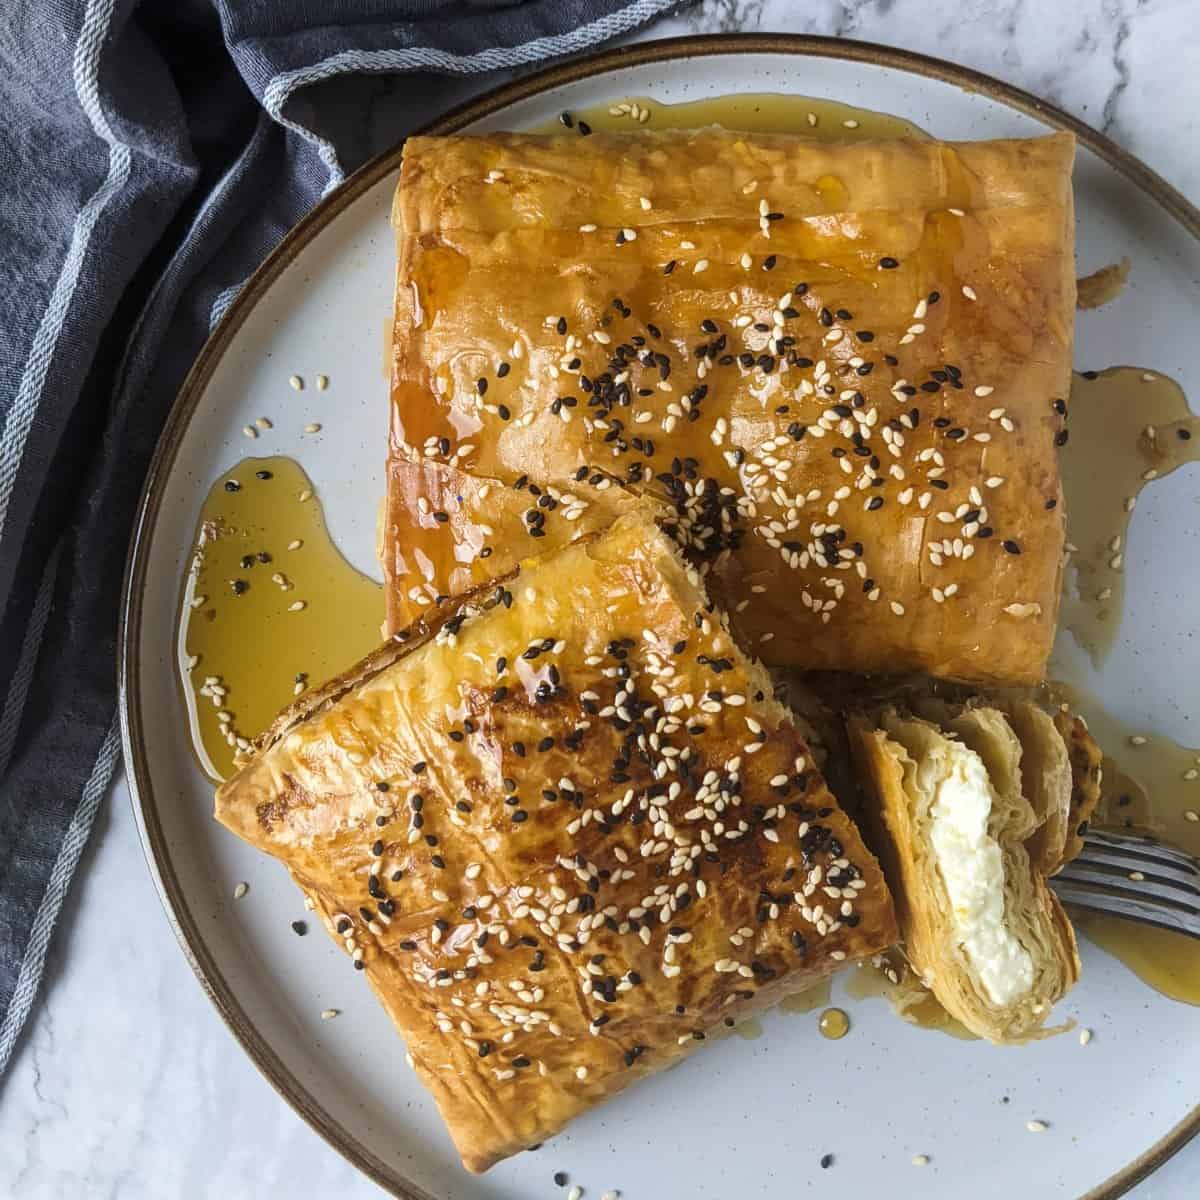 Two blocks of baked feta wrapped in filo served on plate with a bowl of honey and sesame seeds next to it.